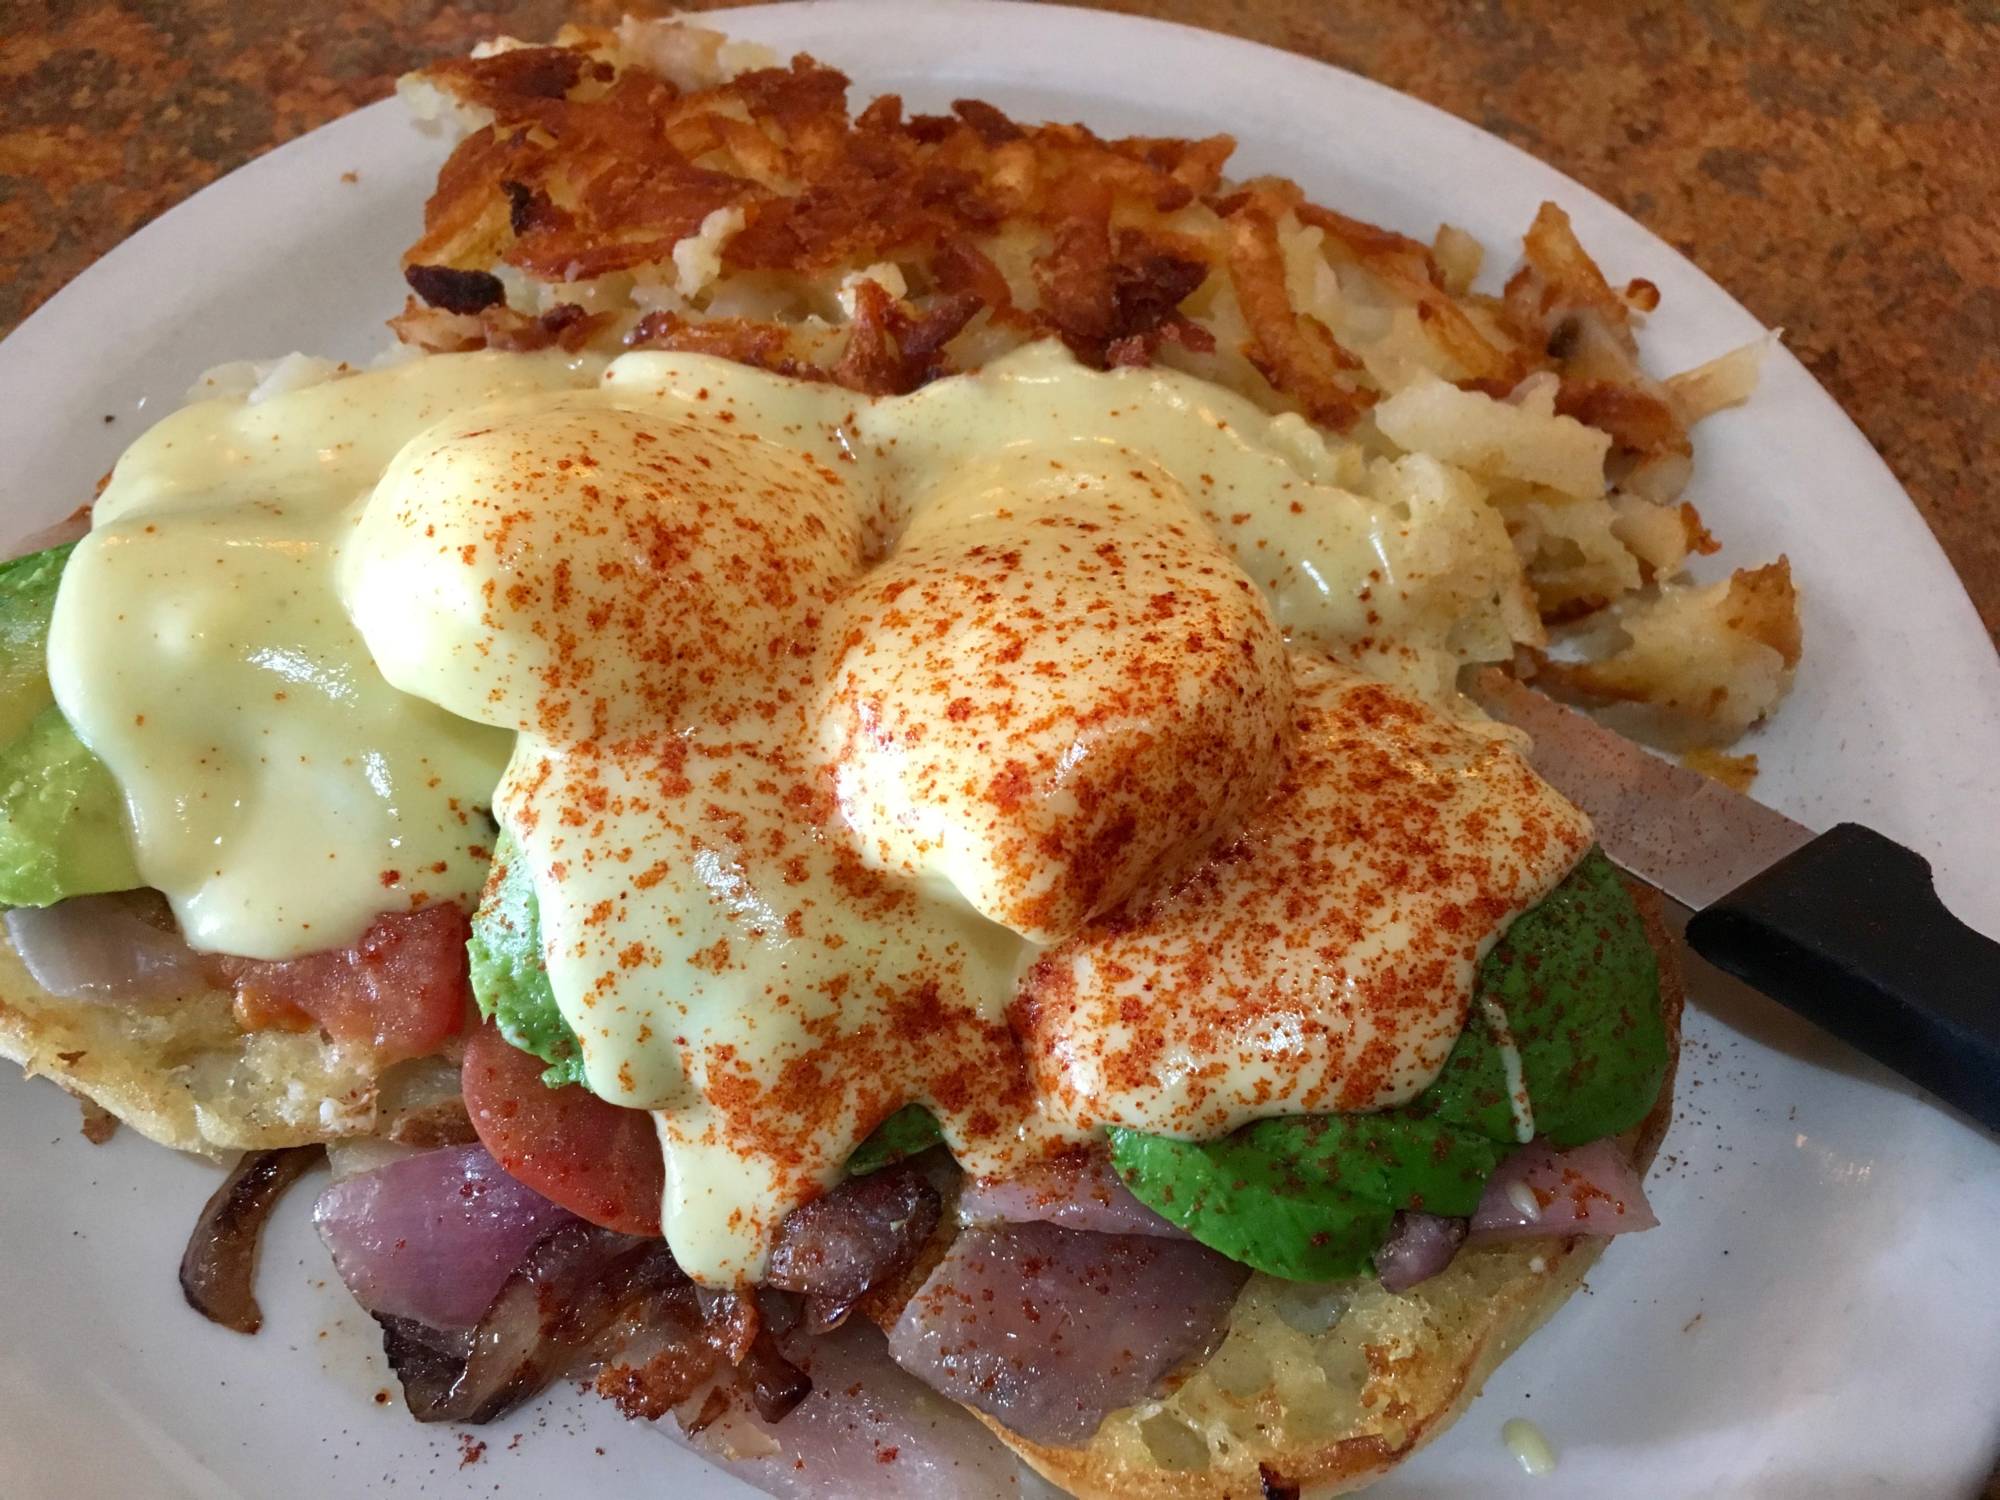 The Blackstone Benedict at Bill’s Cafe in San Jose.